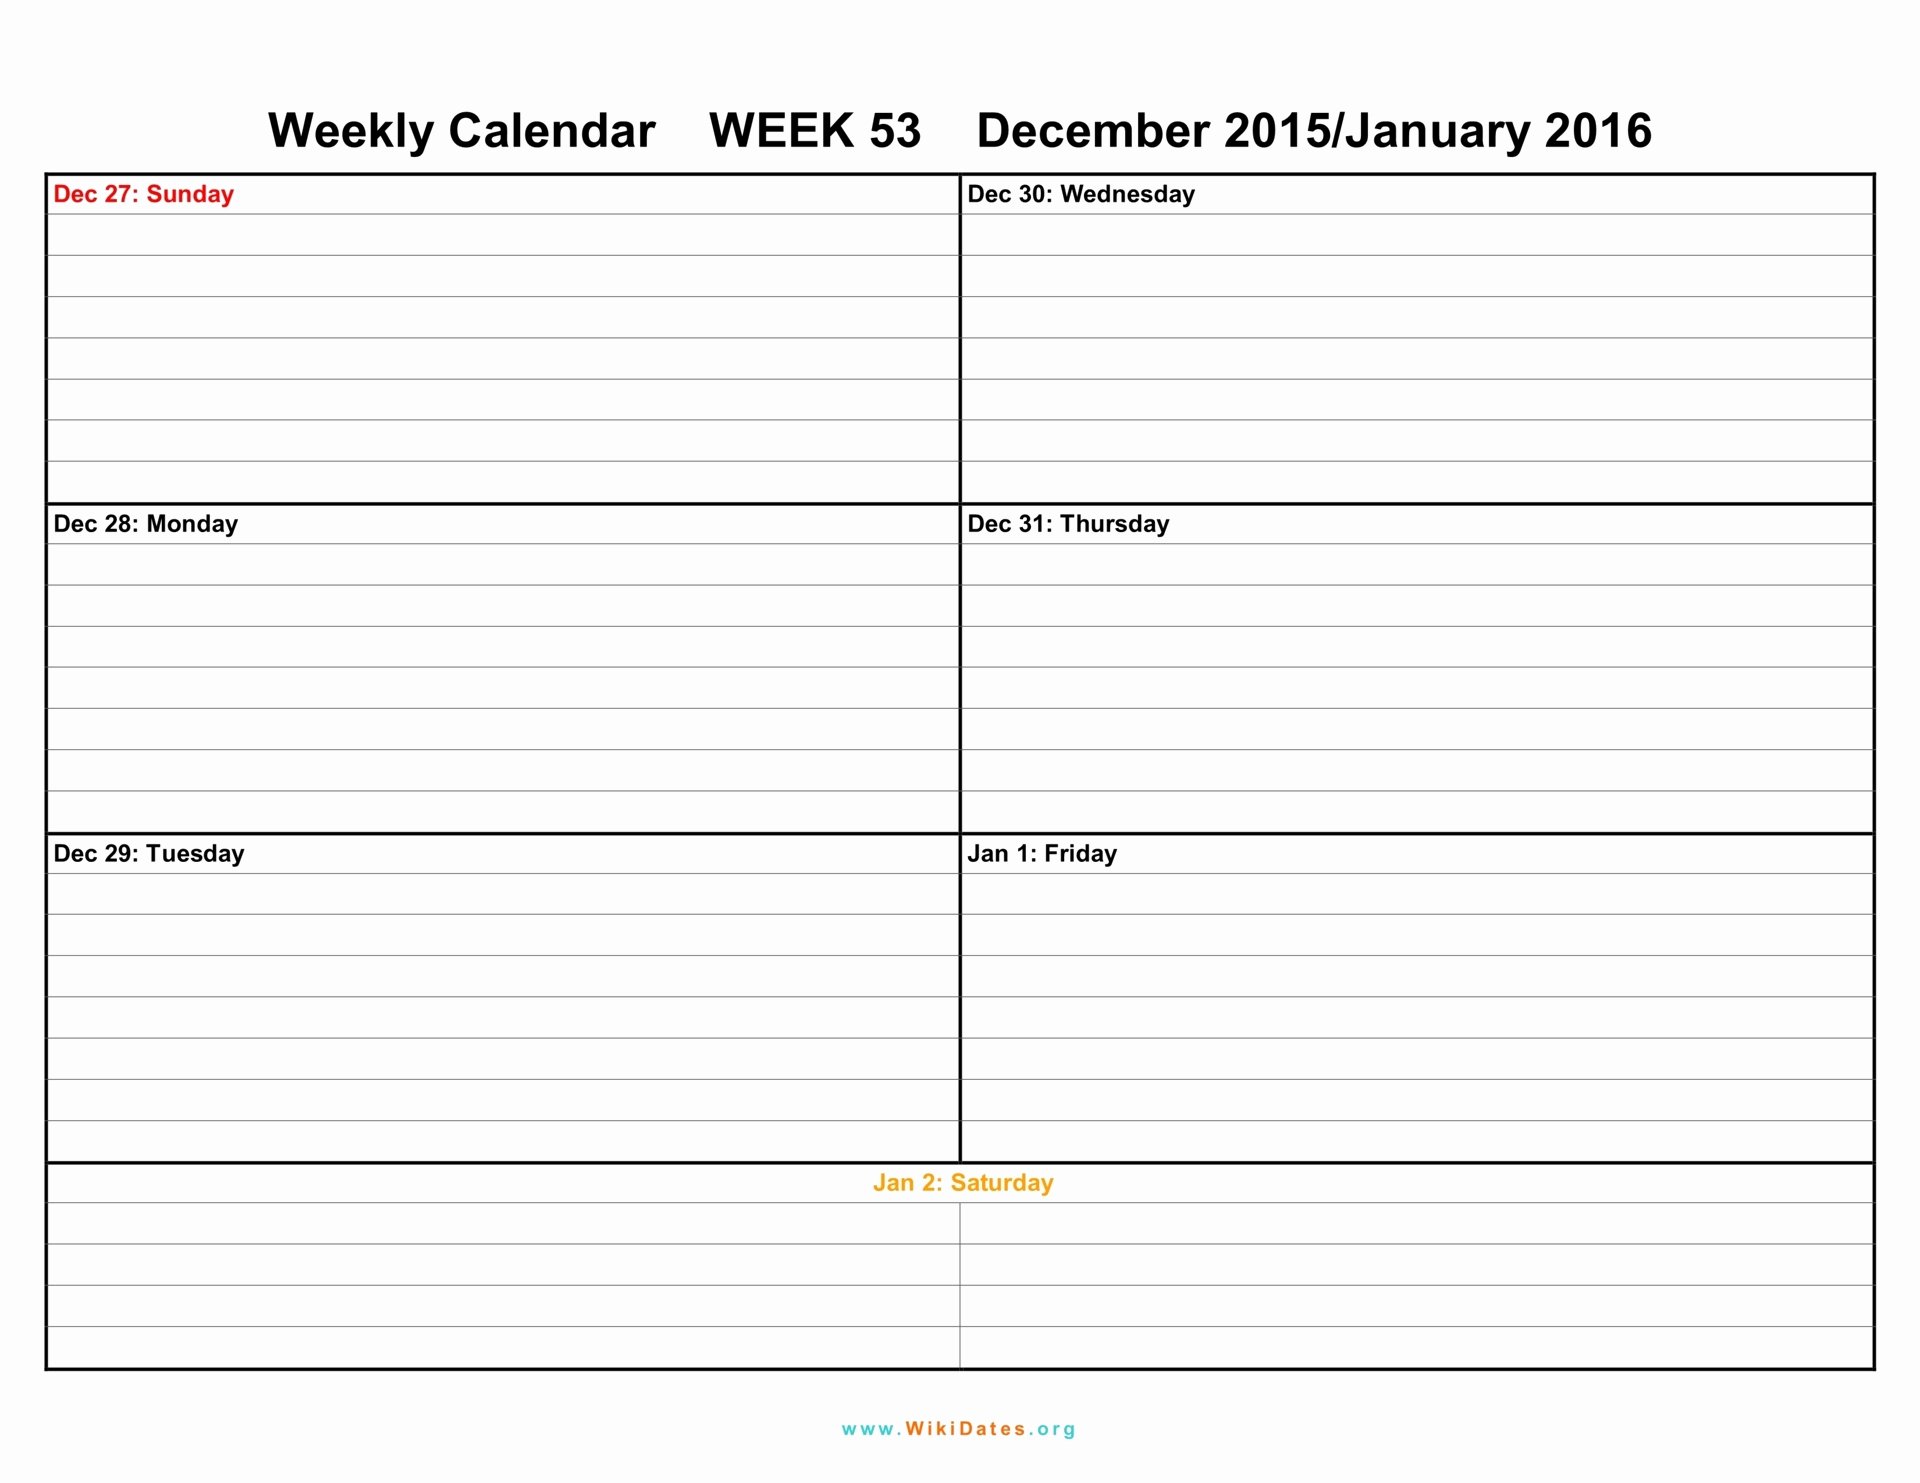 Calendar Template for Mac Elegant Awesome Collection Weekly Blank Calendar Templates